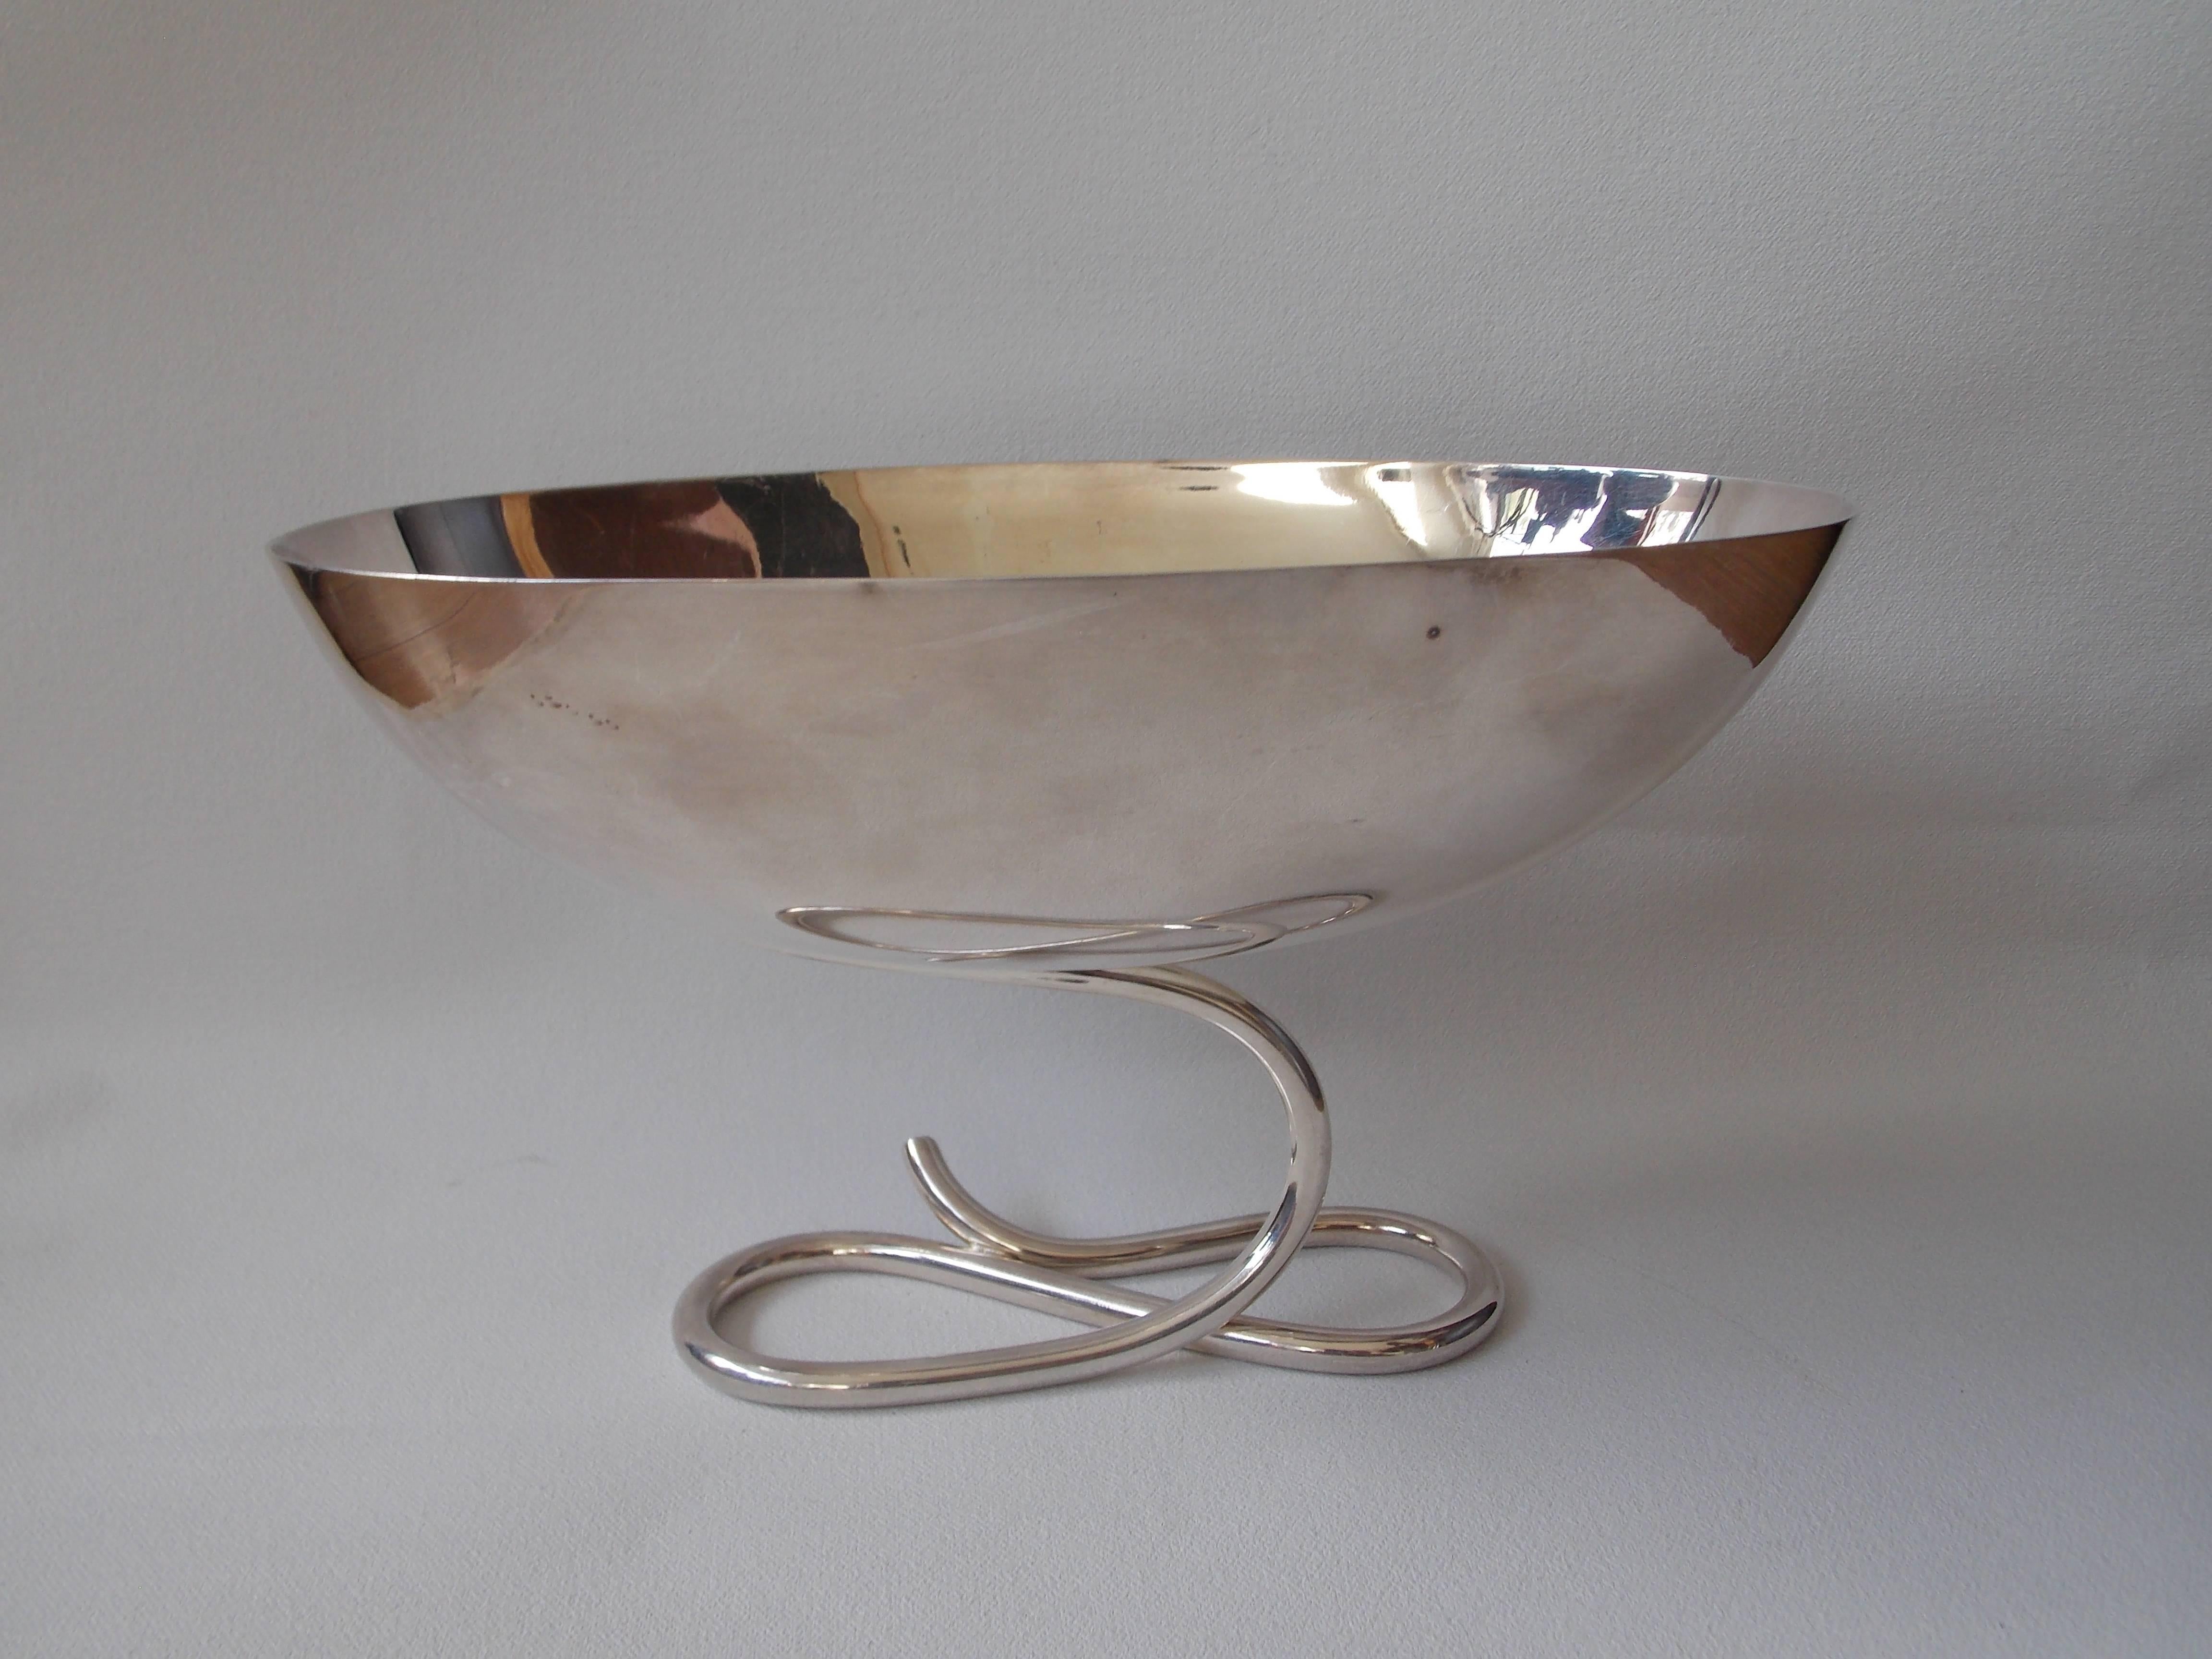 A great silver plated brass design with sculpted serpentine base.
Stamped on the base "Sabattini made in Italy".
It has not been polished and shows minor ware with patina consistent with age.
No damage.
In excellent vintage condition.
    